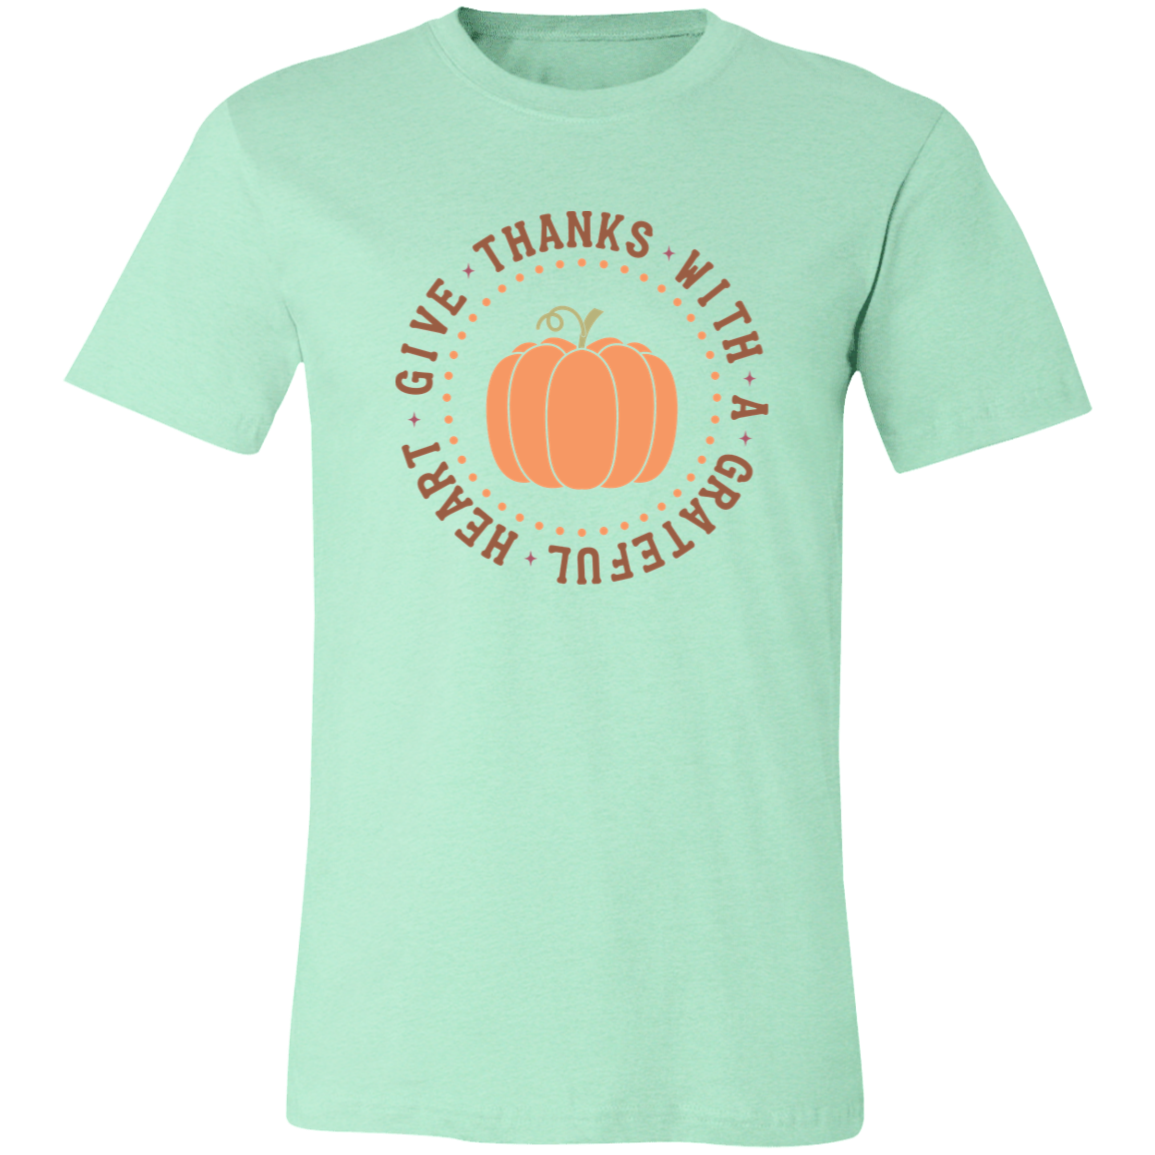 Give Thanks With A Grateful Heart Shirt